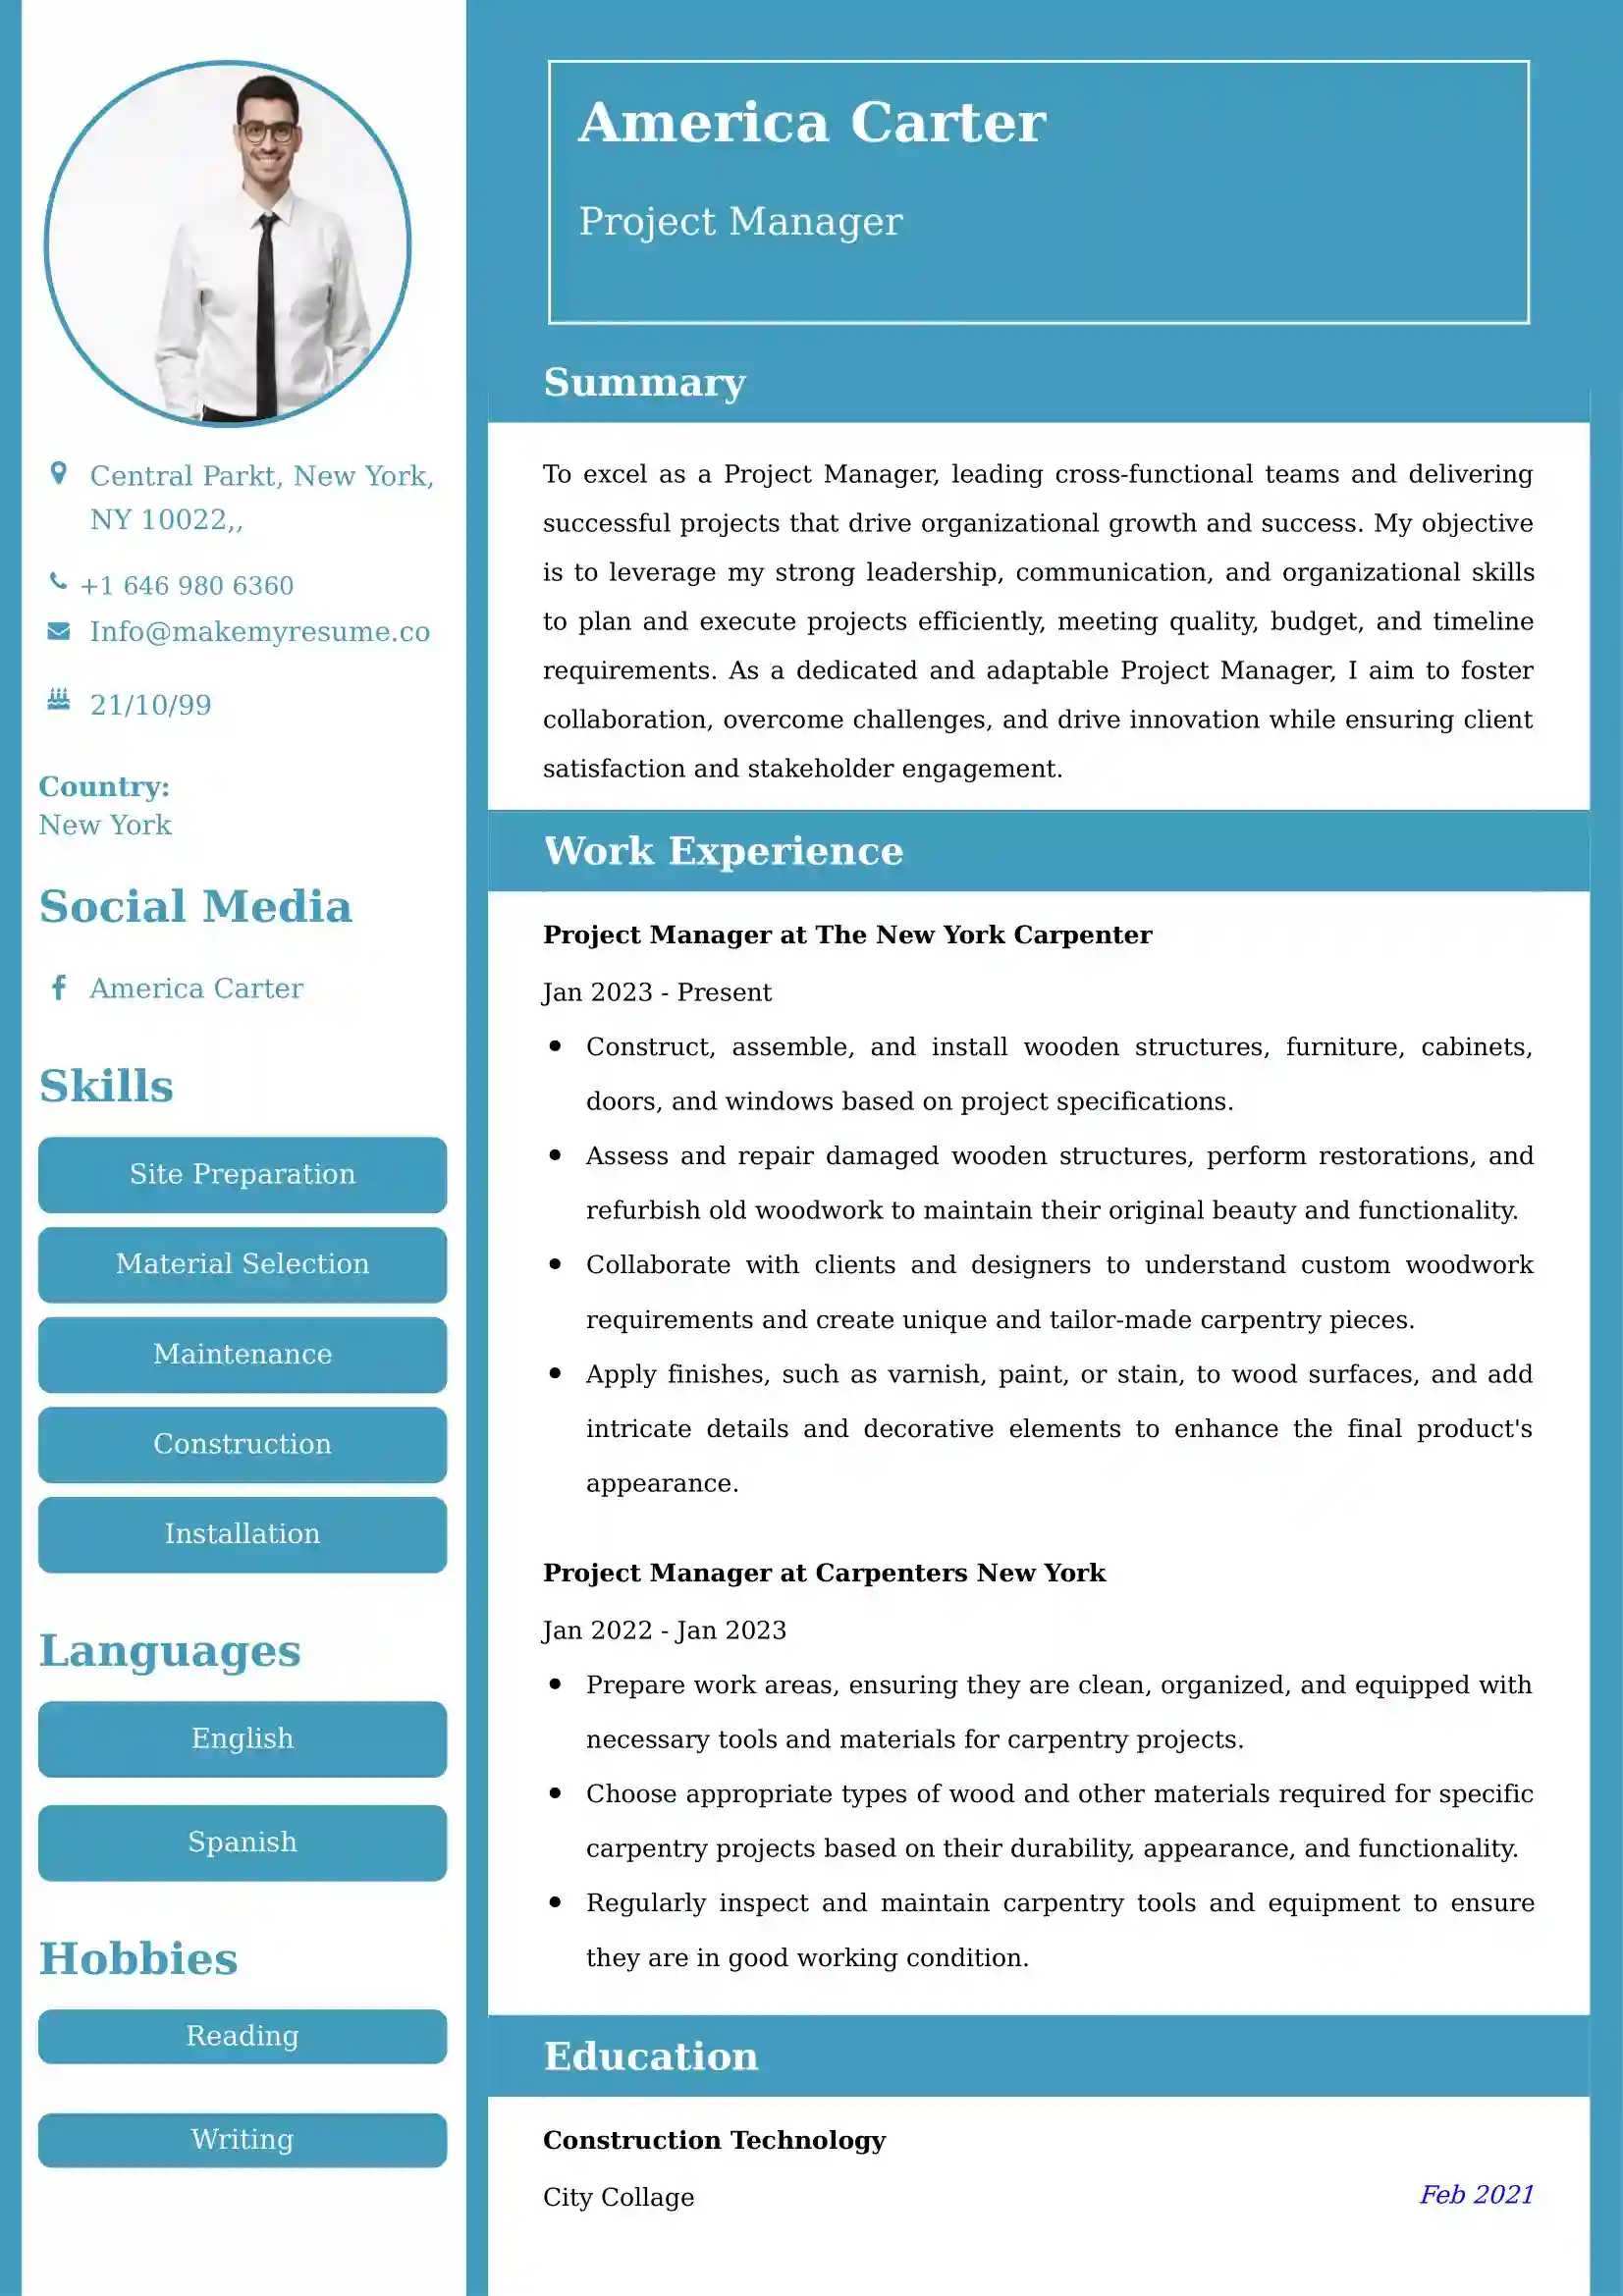 Project Manager Resume Examples - Brazilian Format, Latest Template